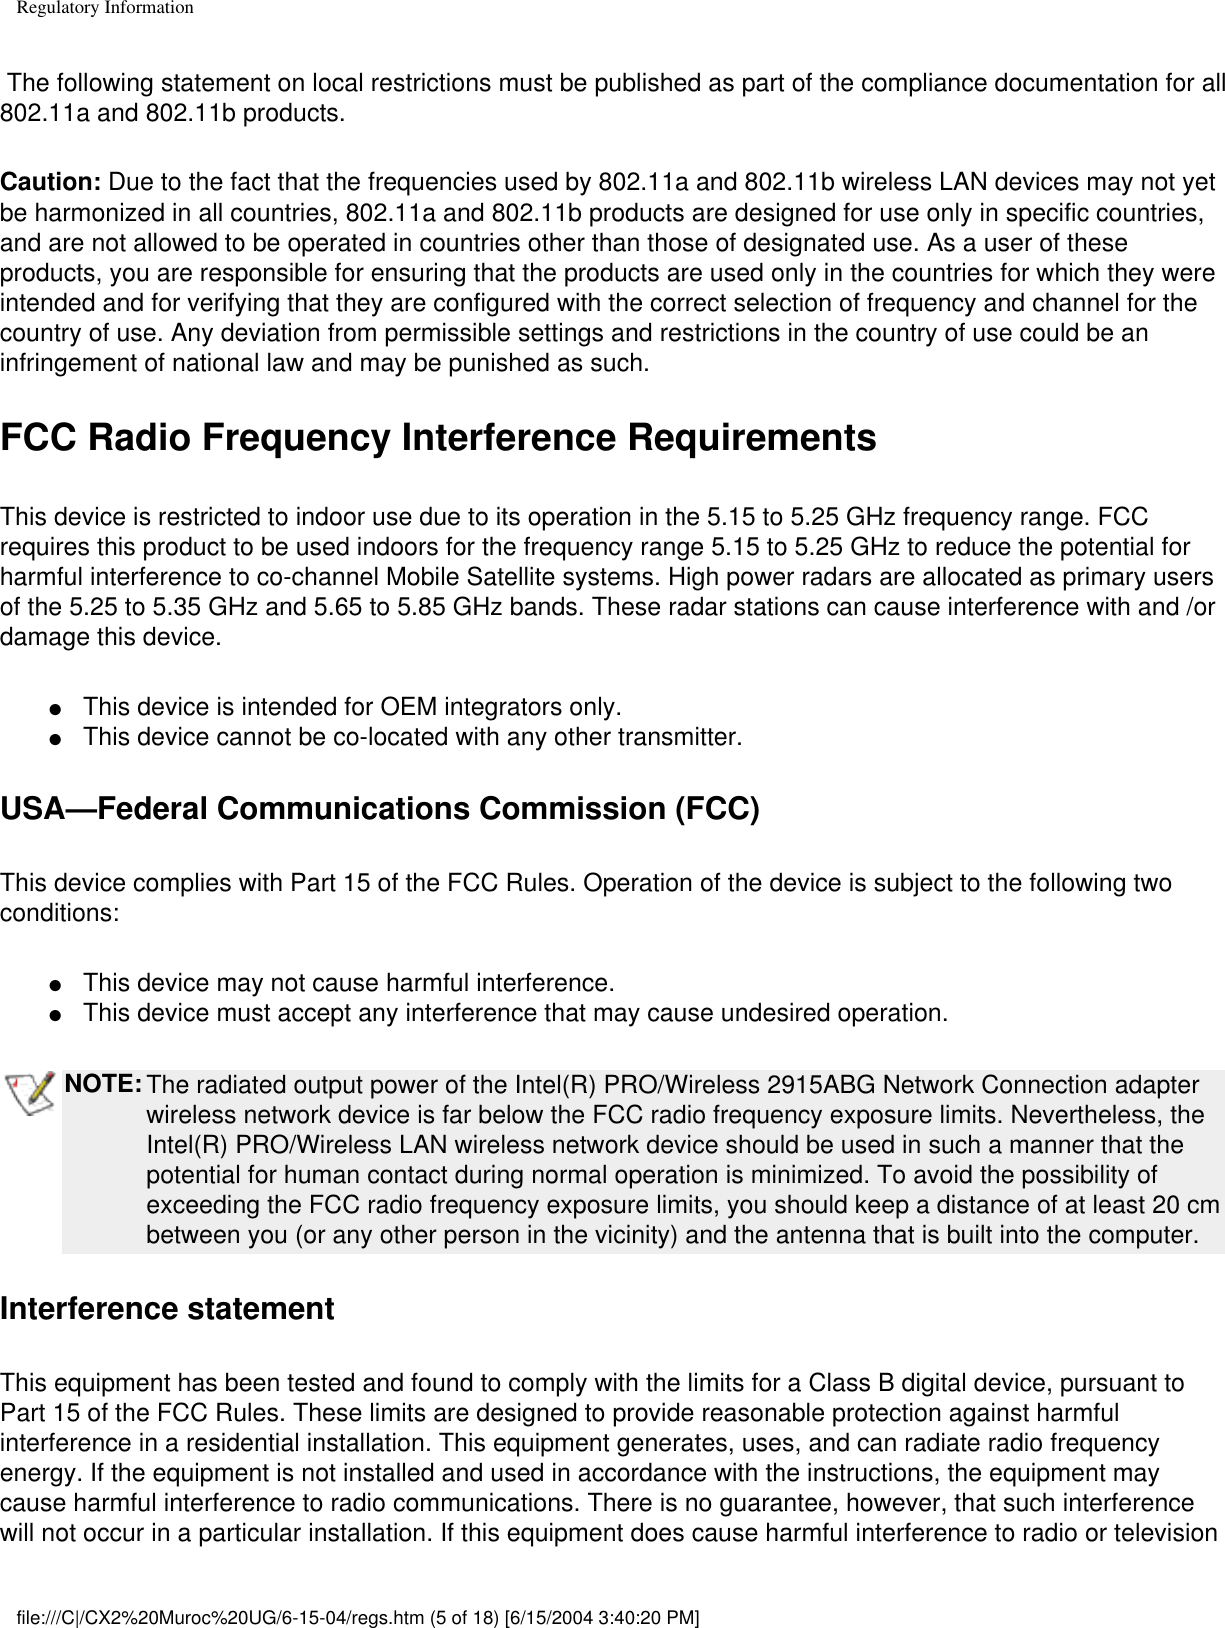 Regulatory Information The following statement on local restrictions must be published as part of the compliance documentation for all 802.11a and 802.11b products. Caution: Due to the fact that the frequencies used by 802.11a and 802.11b wireless LAN devices may not yet be harmonized in all countries, 802.11a and 802.11b products are designed for use only in specific countries, and are not allowed to be operated in countries other than those of designated use. As a user of these products, you are responsible for ensuring that the products are used only in the countries for which they were intended and for verifying that they are configured with the correct selection of frequency and channel for the country of use. Any deviation from permissible settings and restrictions in the country of use could be an infringement of national law and may be punished as such. FCC Radio Frequency Interference Requirements This device is restricted to indoor use due to its operation in the 5.15 to 5.25 GHz frequency range. FCC requires this product to be used indoors for the frequency range 5.15 to 5.25 GHz to reduce the potential for harmful interference to co-channel Mobile Satellite systems. High power radars are allocated as primary users of the 5.25 to 5.35 GHz and 5.65 to 5.85 GHz bands. These radar stations can cause interference with and /or damage this device. ●     This device is intended for OEM integrators only.●     This device cannot be co-located with any other transmitter. USA—Federal Communications Commission (FCC)This device complies with Part 15 of the FCC Rules. Operation of the device is subject to the following two conditions:●     This device may not cause harmful interference. ●     This device must accept any interference that may cause undesired operation.NOTE: The radiated output power of the Intel(R) PRO/Wireless 2915ABG Network Connection adapter wireless network device is far below the FCC radio frequency exposure limits. Nevertheless, the Intel(R) PRO/Wireless LAN wireless network device should be used in such a manner that the potential for human contact during normal operation is minimized. To avoid the possibility of exceeding the FCC radio frequency exposure limits, you should keep a distance of at least 20 cm between you (or any other person in the vicinity) and the antenna that is built into the computer.Interference statementThis equipment has been tested and found to comply with the limits for a Class B digital device, pursuant to Part 15 of the FCC Rules. These limits are designed to provide reasonable protection against harmful interference in a residential installation. This equipment generates, uses, and can radiate radio frequency energy. If the equipment is not installed and used in accordance with the instructions, the equipment may cause harmful interference to radio communications. There is no guarantee, however, that such interference will not occur in a particular installation. If this equipment does cause harmful interference to radio or television file:///C|/CX2%20Muroc%20UG/6-15-04/regs.htm (5 of 18) [6/15/2004 3:40:20 PM]